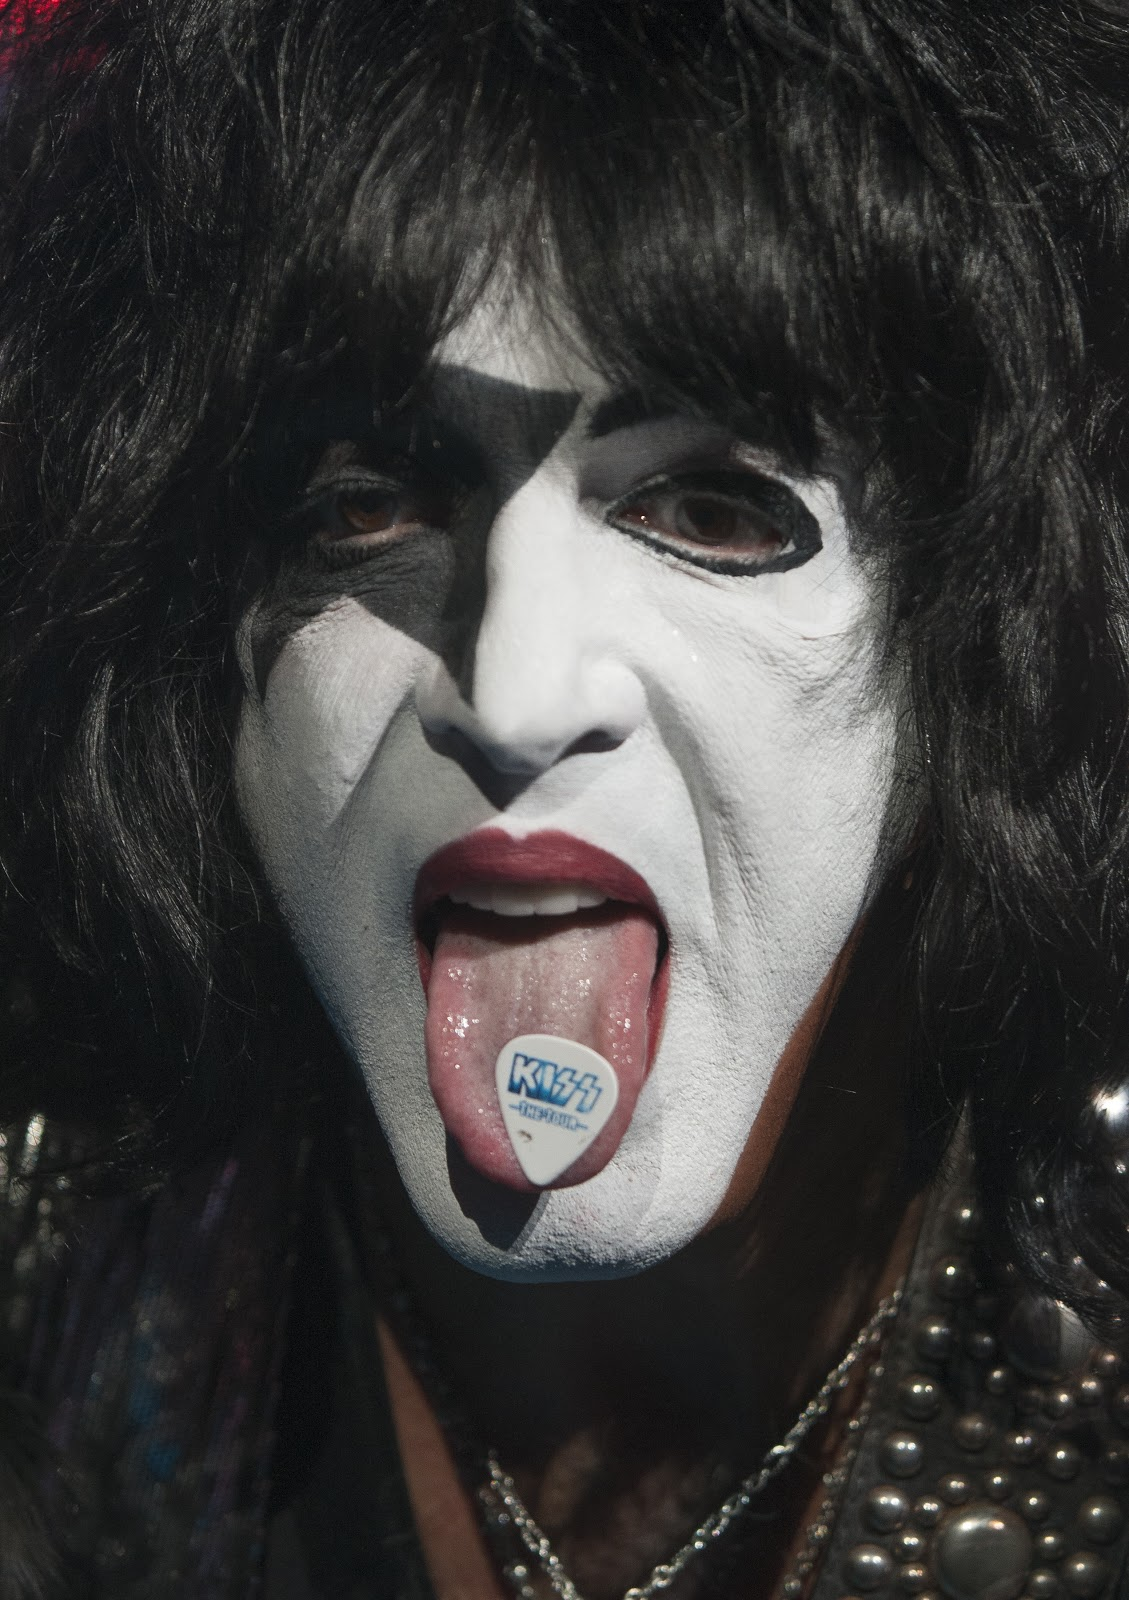 Paul Stanley of KISS is a Closet Homosexual, According to Peter Criss and Ace Frehley